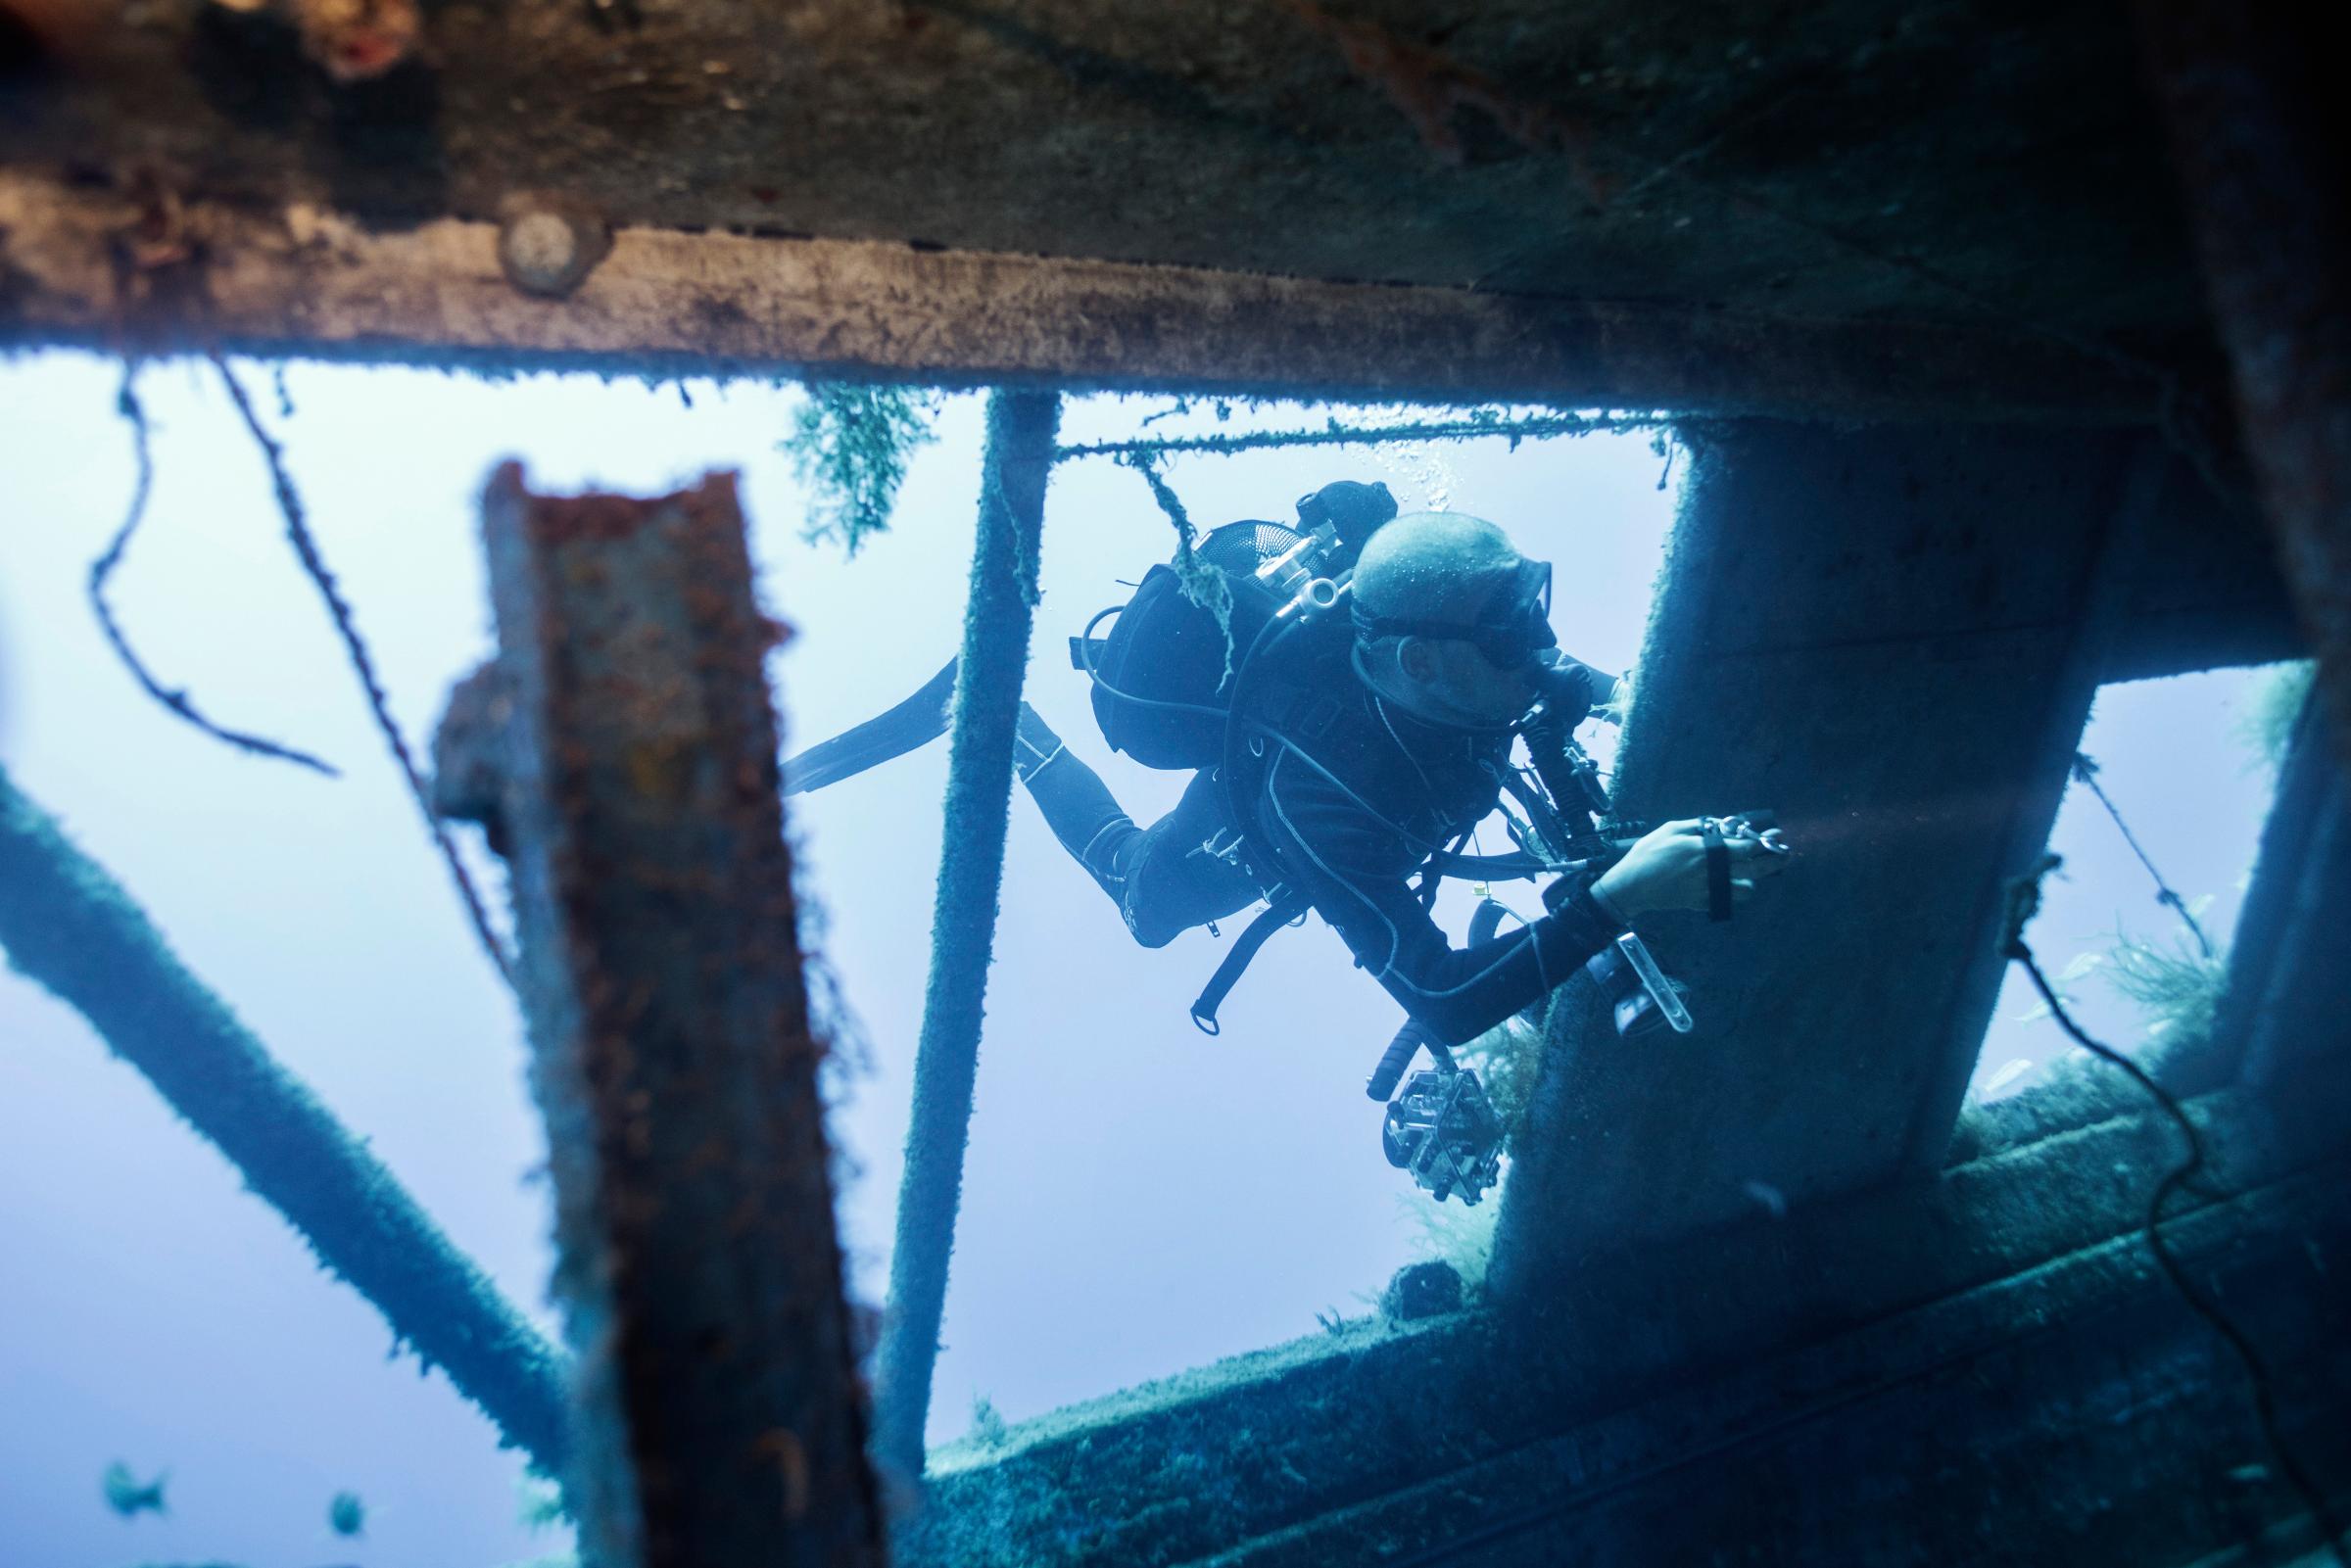 A scuba-diver enters the shipwreck that sank off the coast of the Italian island of Lampedusa lies at a depth of 164 ft. on the seabed, on Sept. 22, 2014. The tragedy that happened a year ago on Oct. 3, 2013 killed 366 migrants from North Africa.